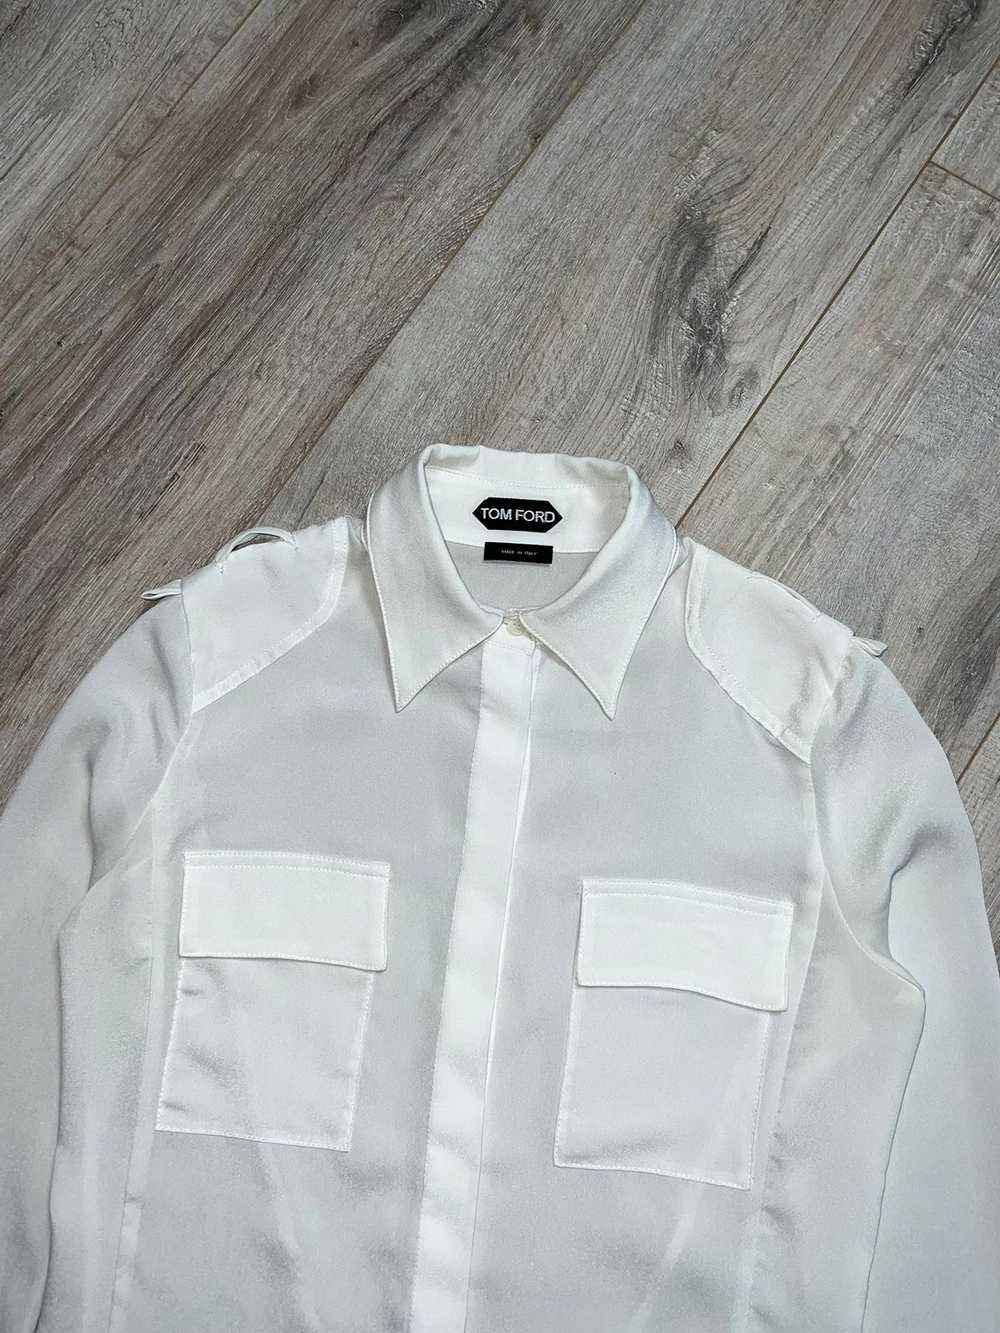 Gucci × Tom Ford TOM FORD Shirt Button Up Silk Po… - image 4